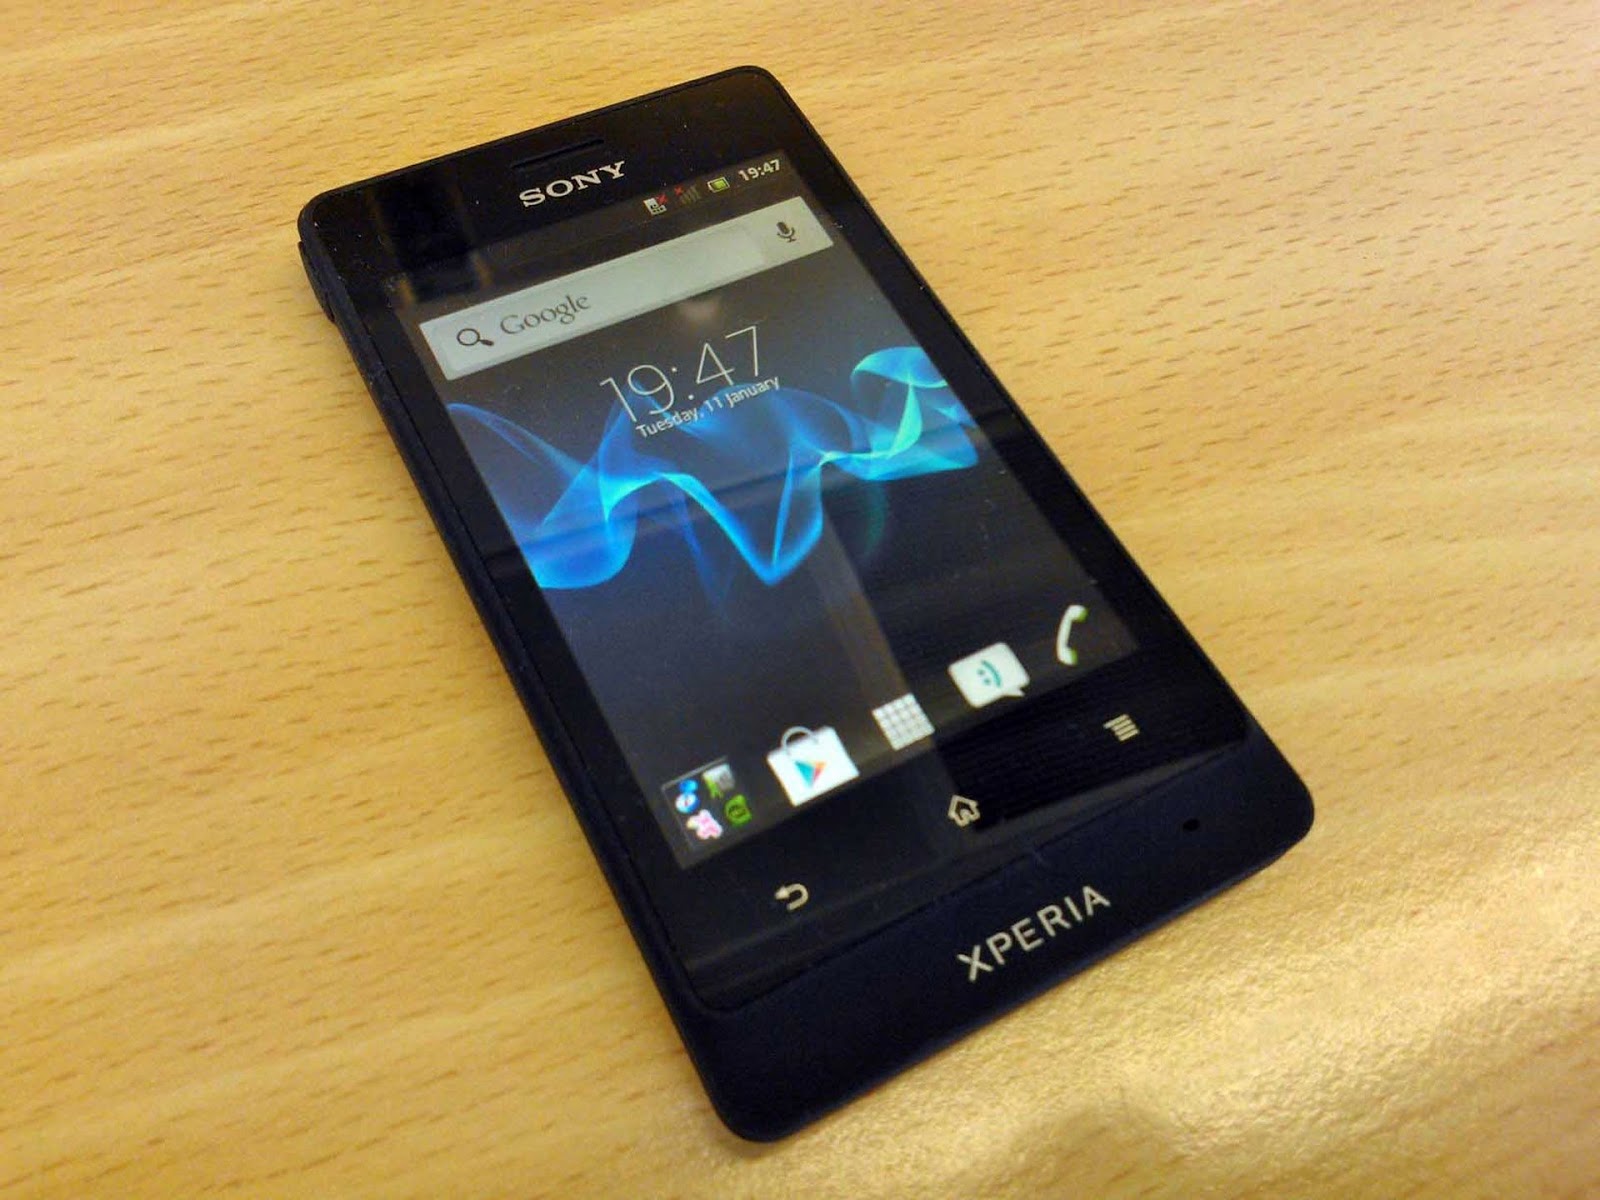 ... Phone Photos: SONY XPERIA ION Android Touchscreen Mobile Phone Images